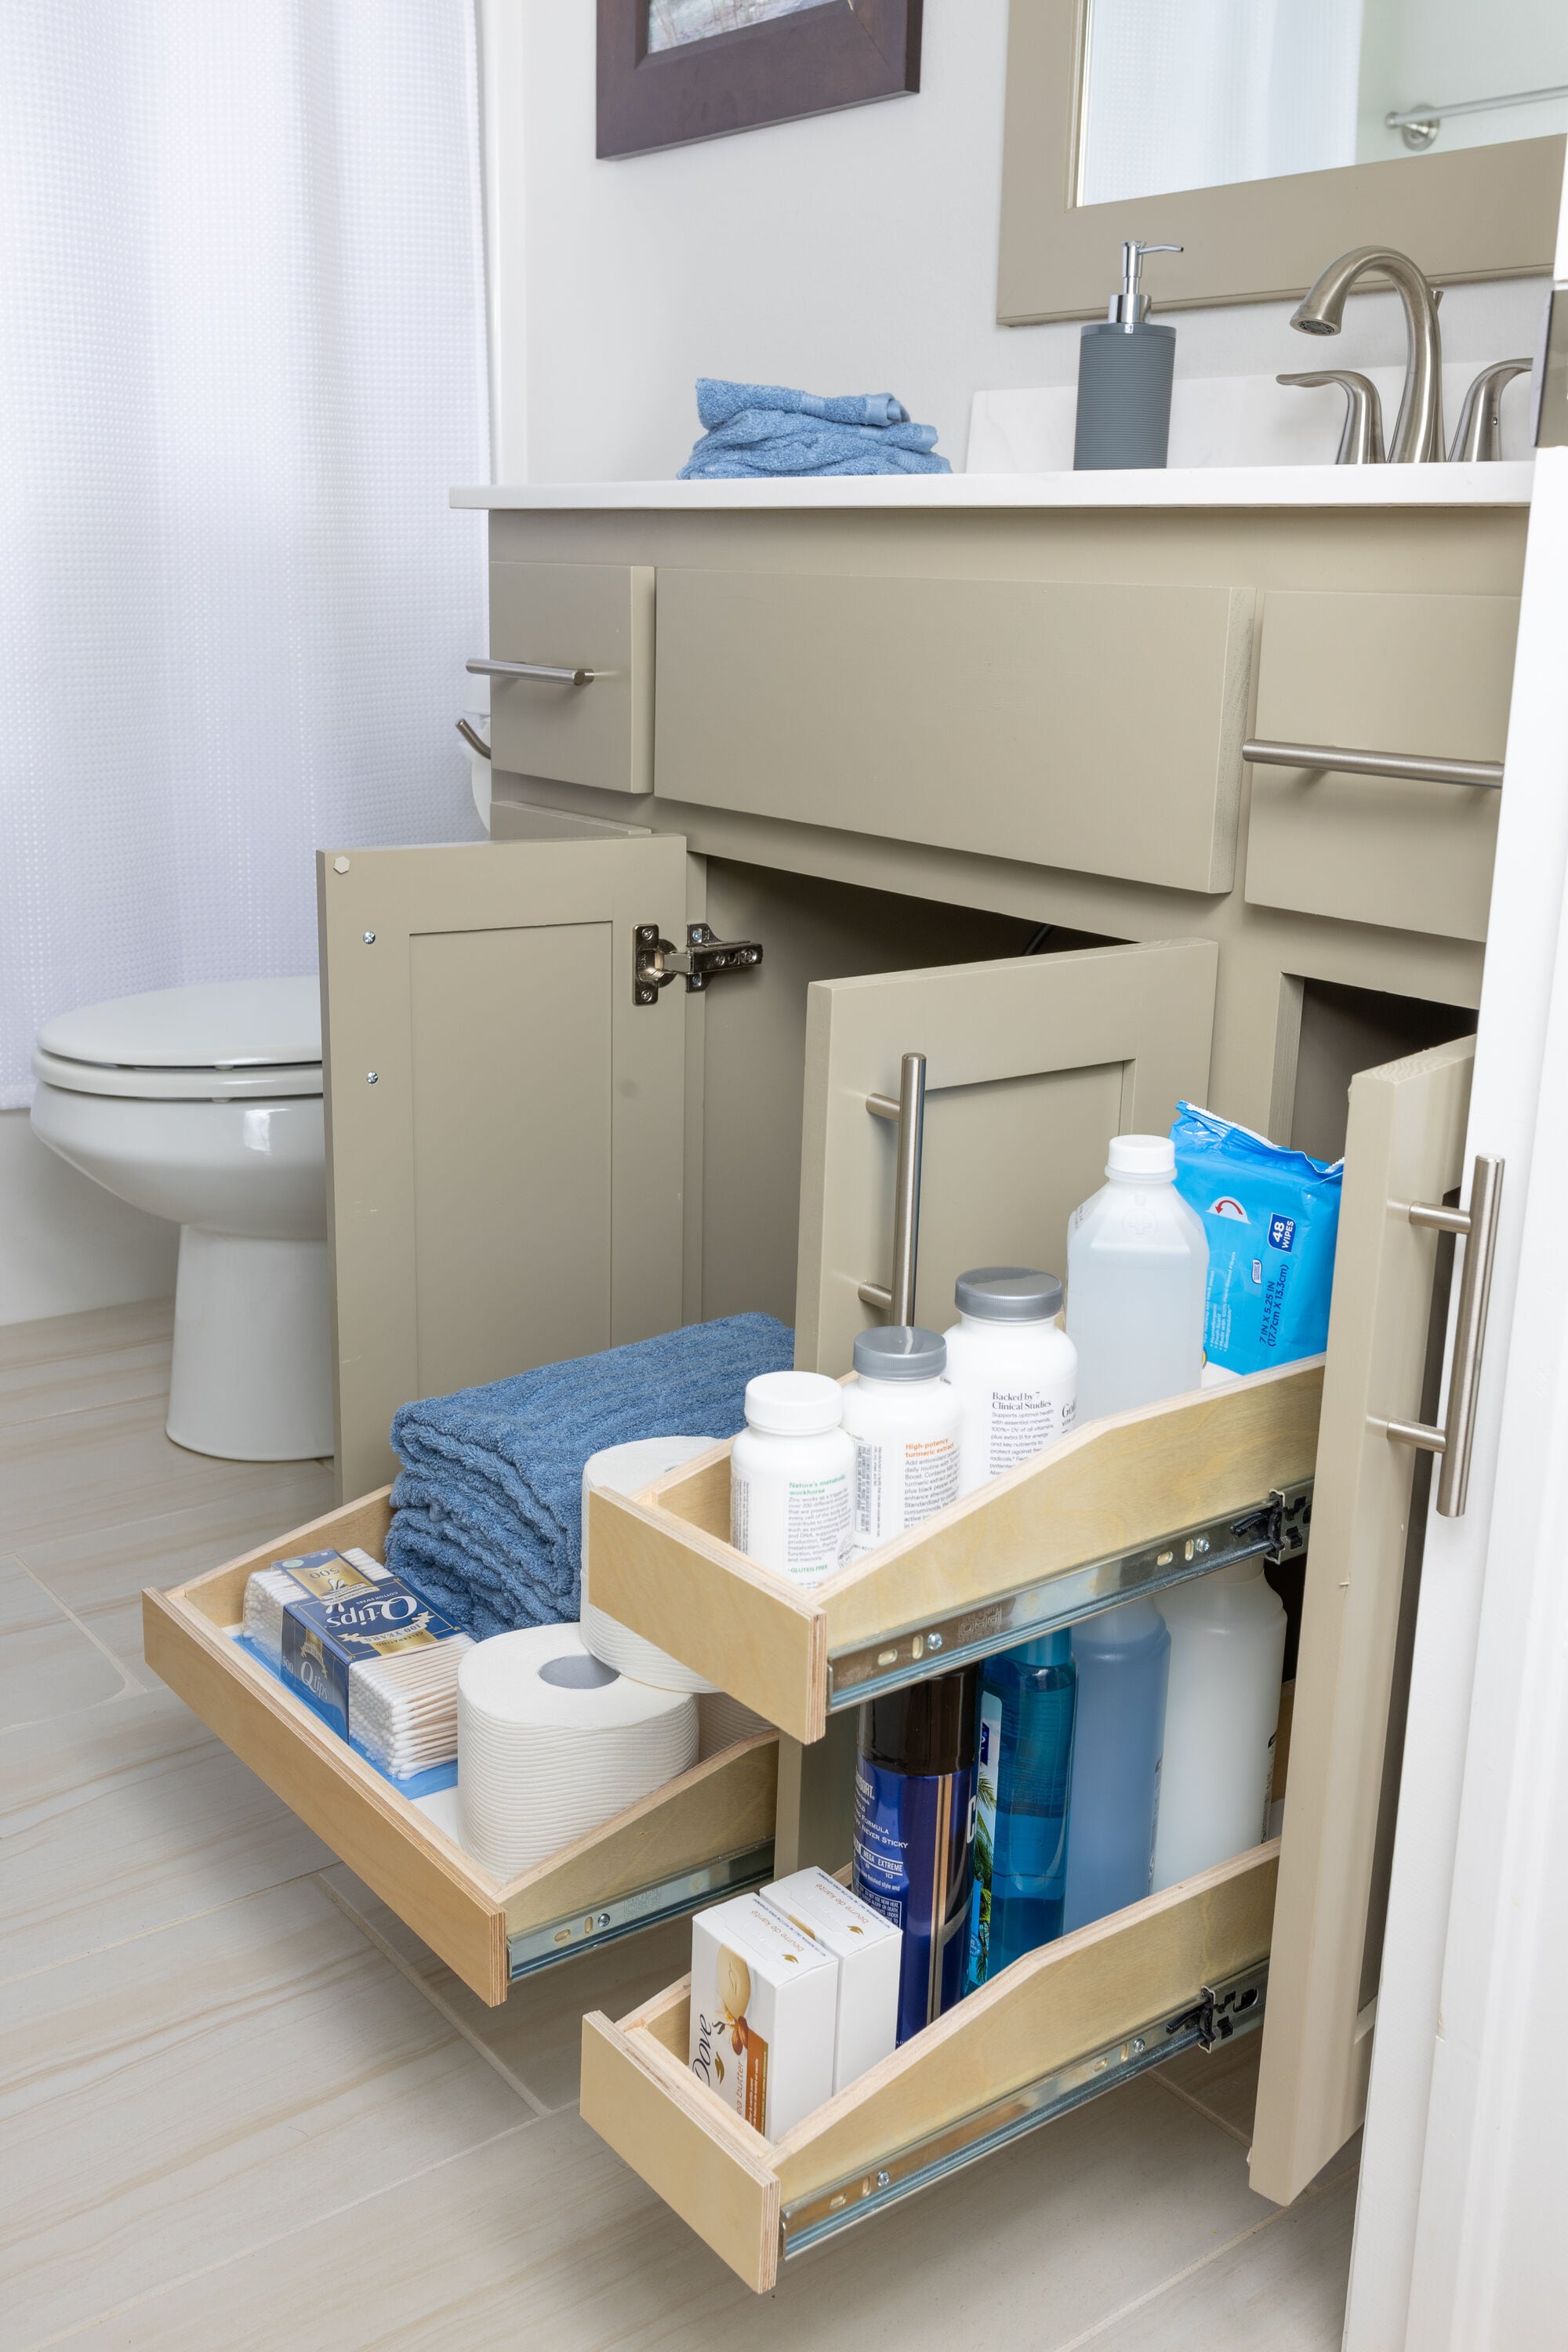 pull out shelving for bathroom cabinets storage solution shelves that slide